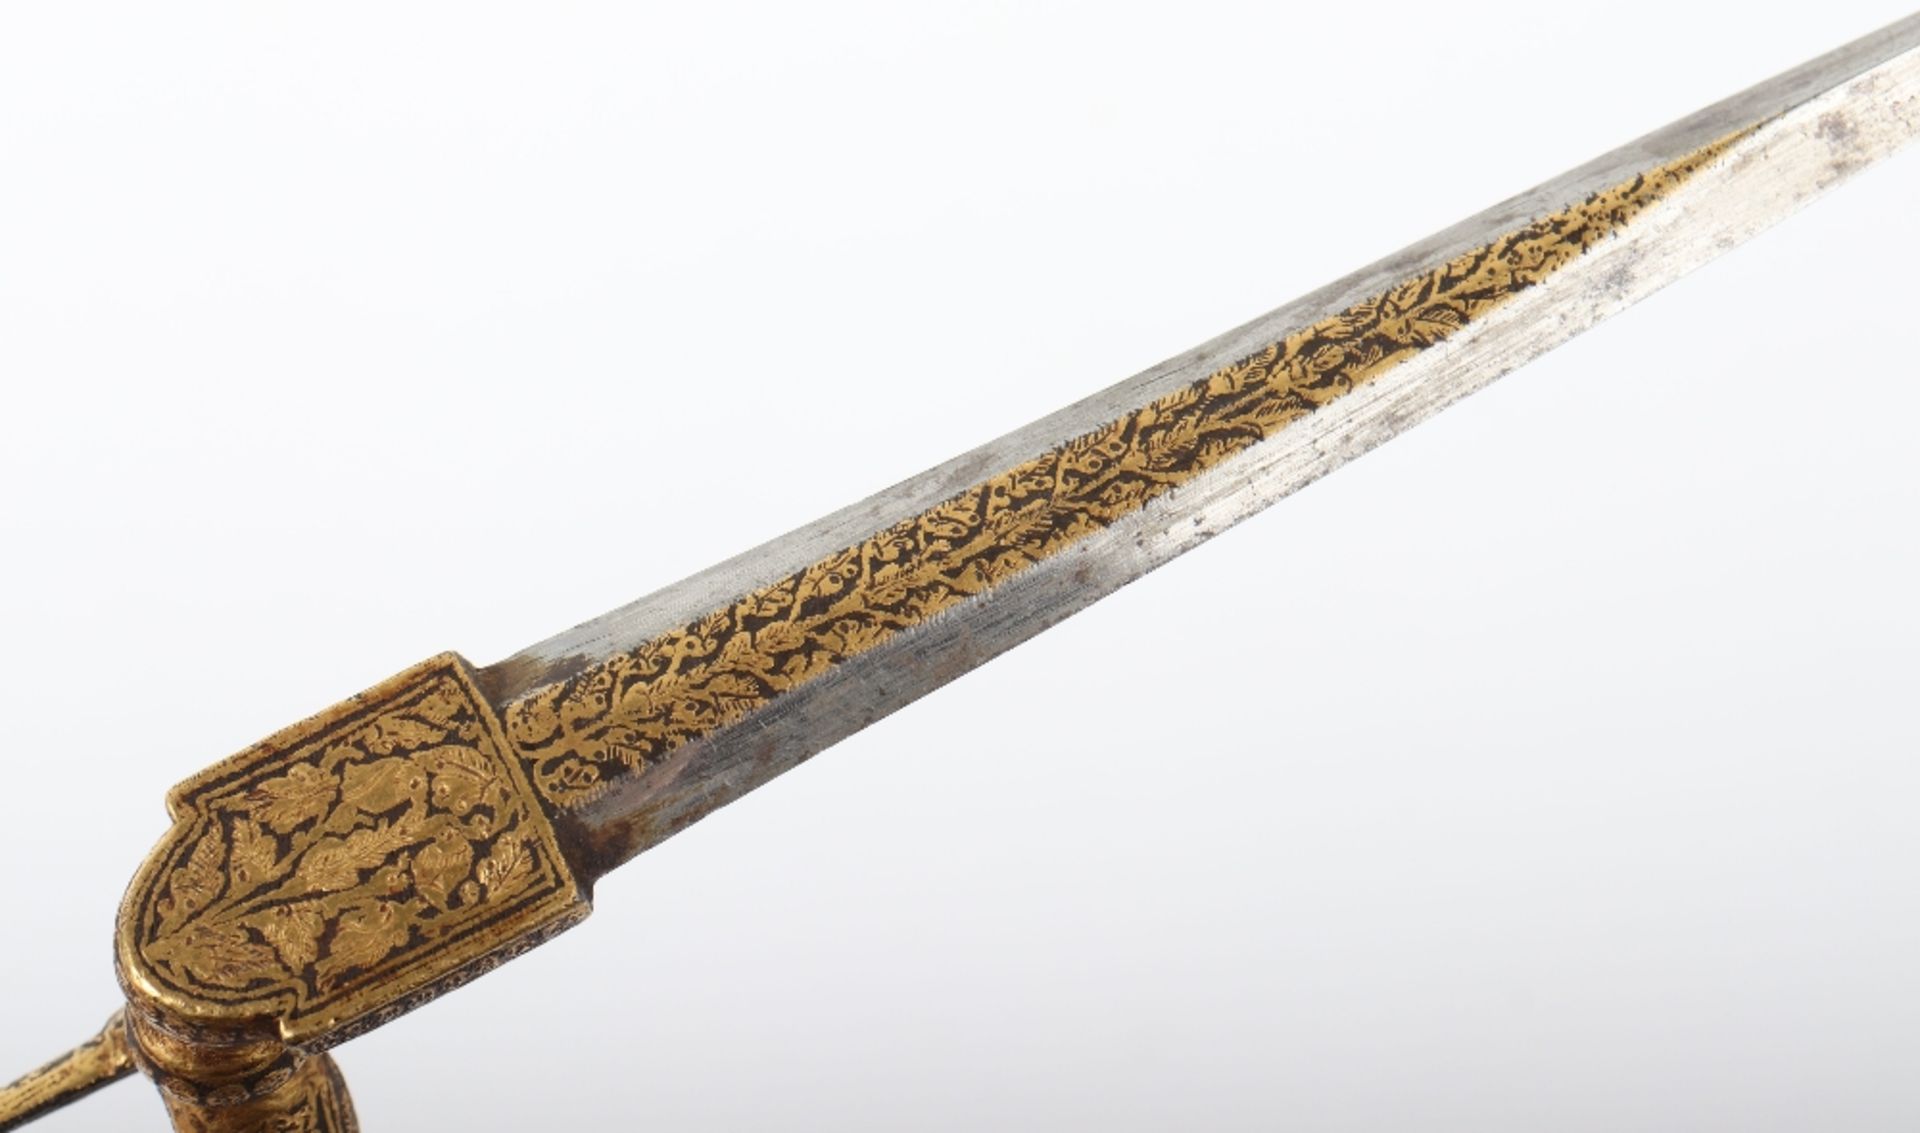 Rare Indian Bayonet Sangin Intended to be Bound to a Matchlock Gun Torador, 18th or 19th Century - Image 12 of 16